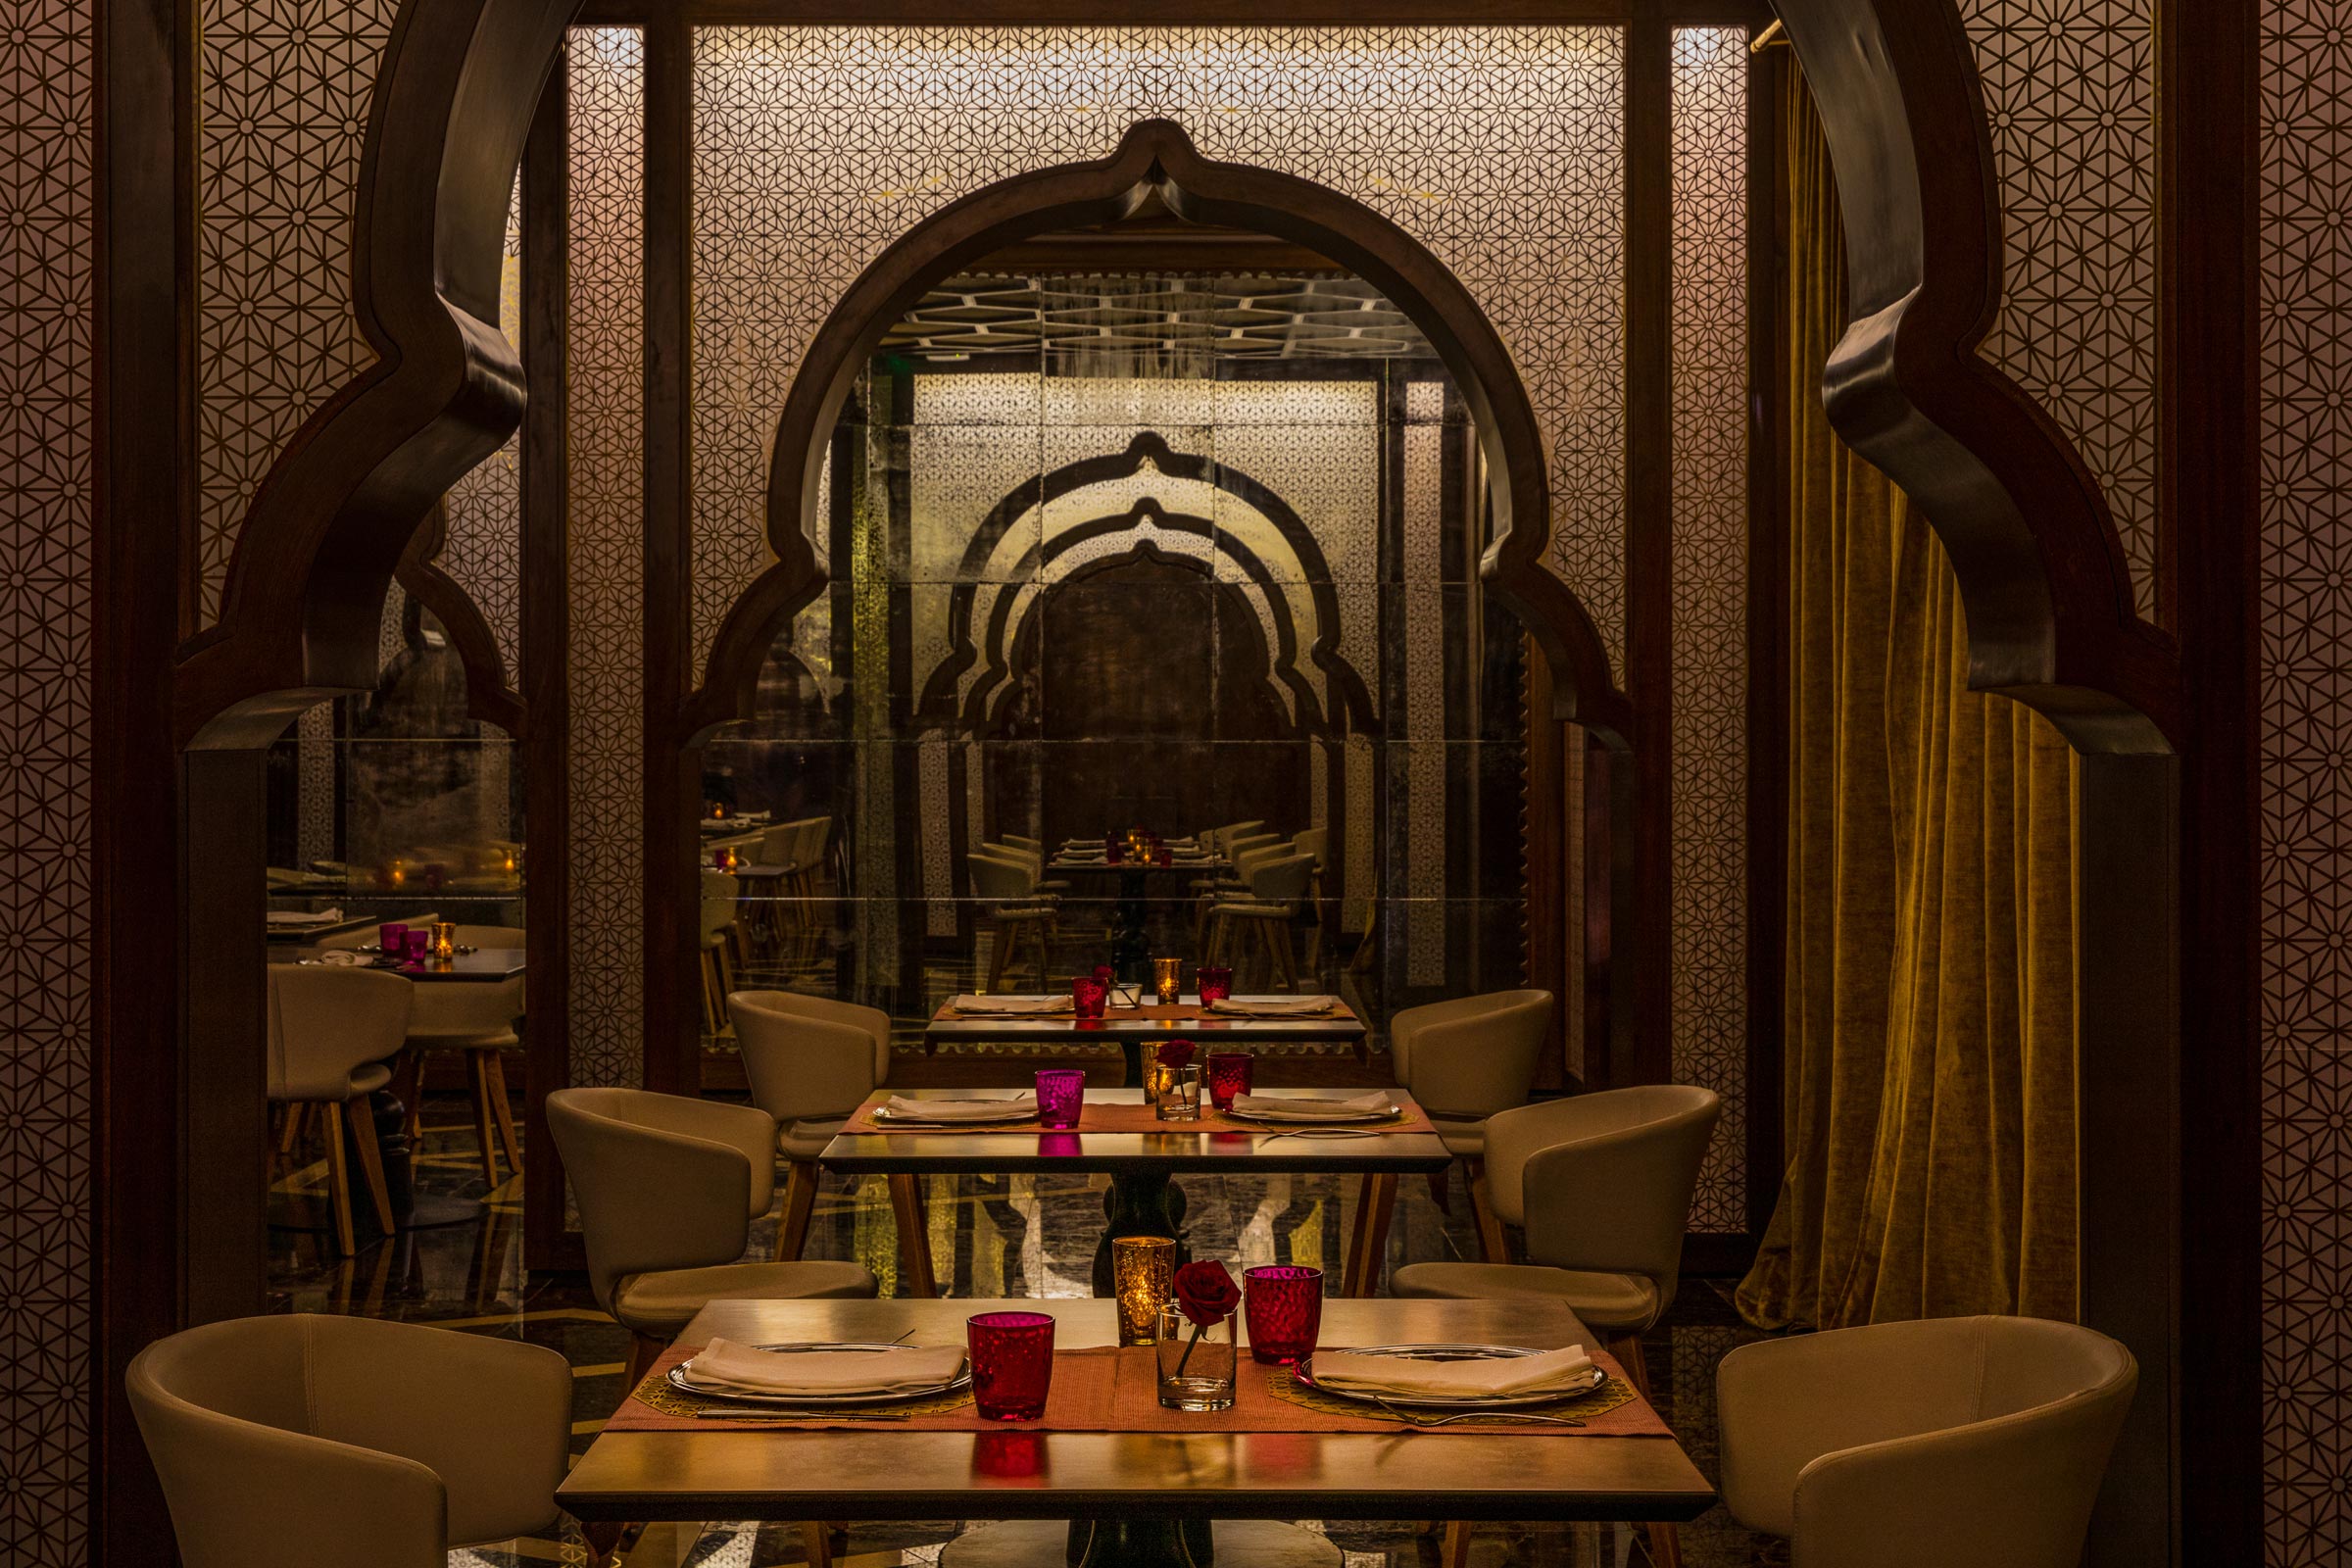 Basmati Restaurant at Excellence Riviera Cancun invites you to enjoy the fresh and bold flavors of Indian cuisine